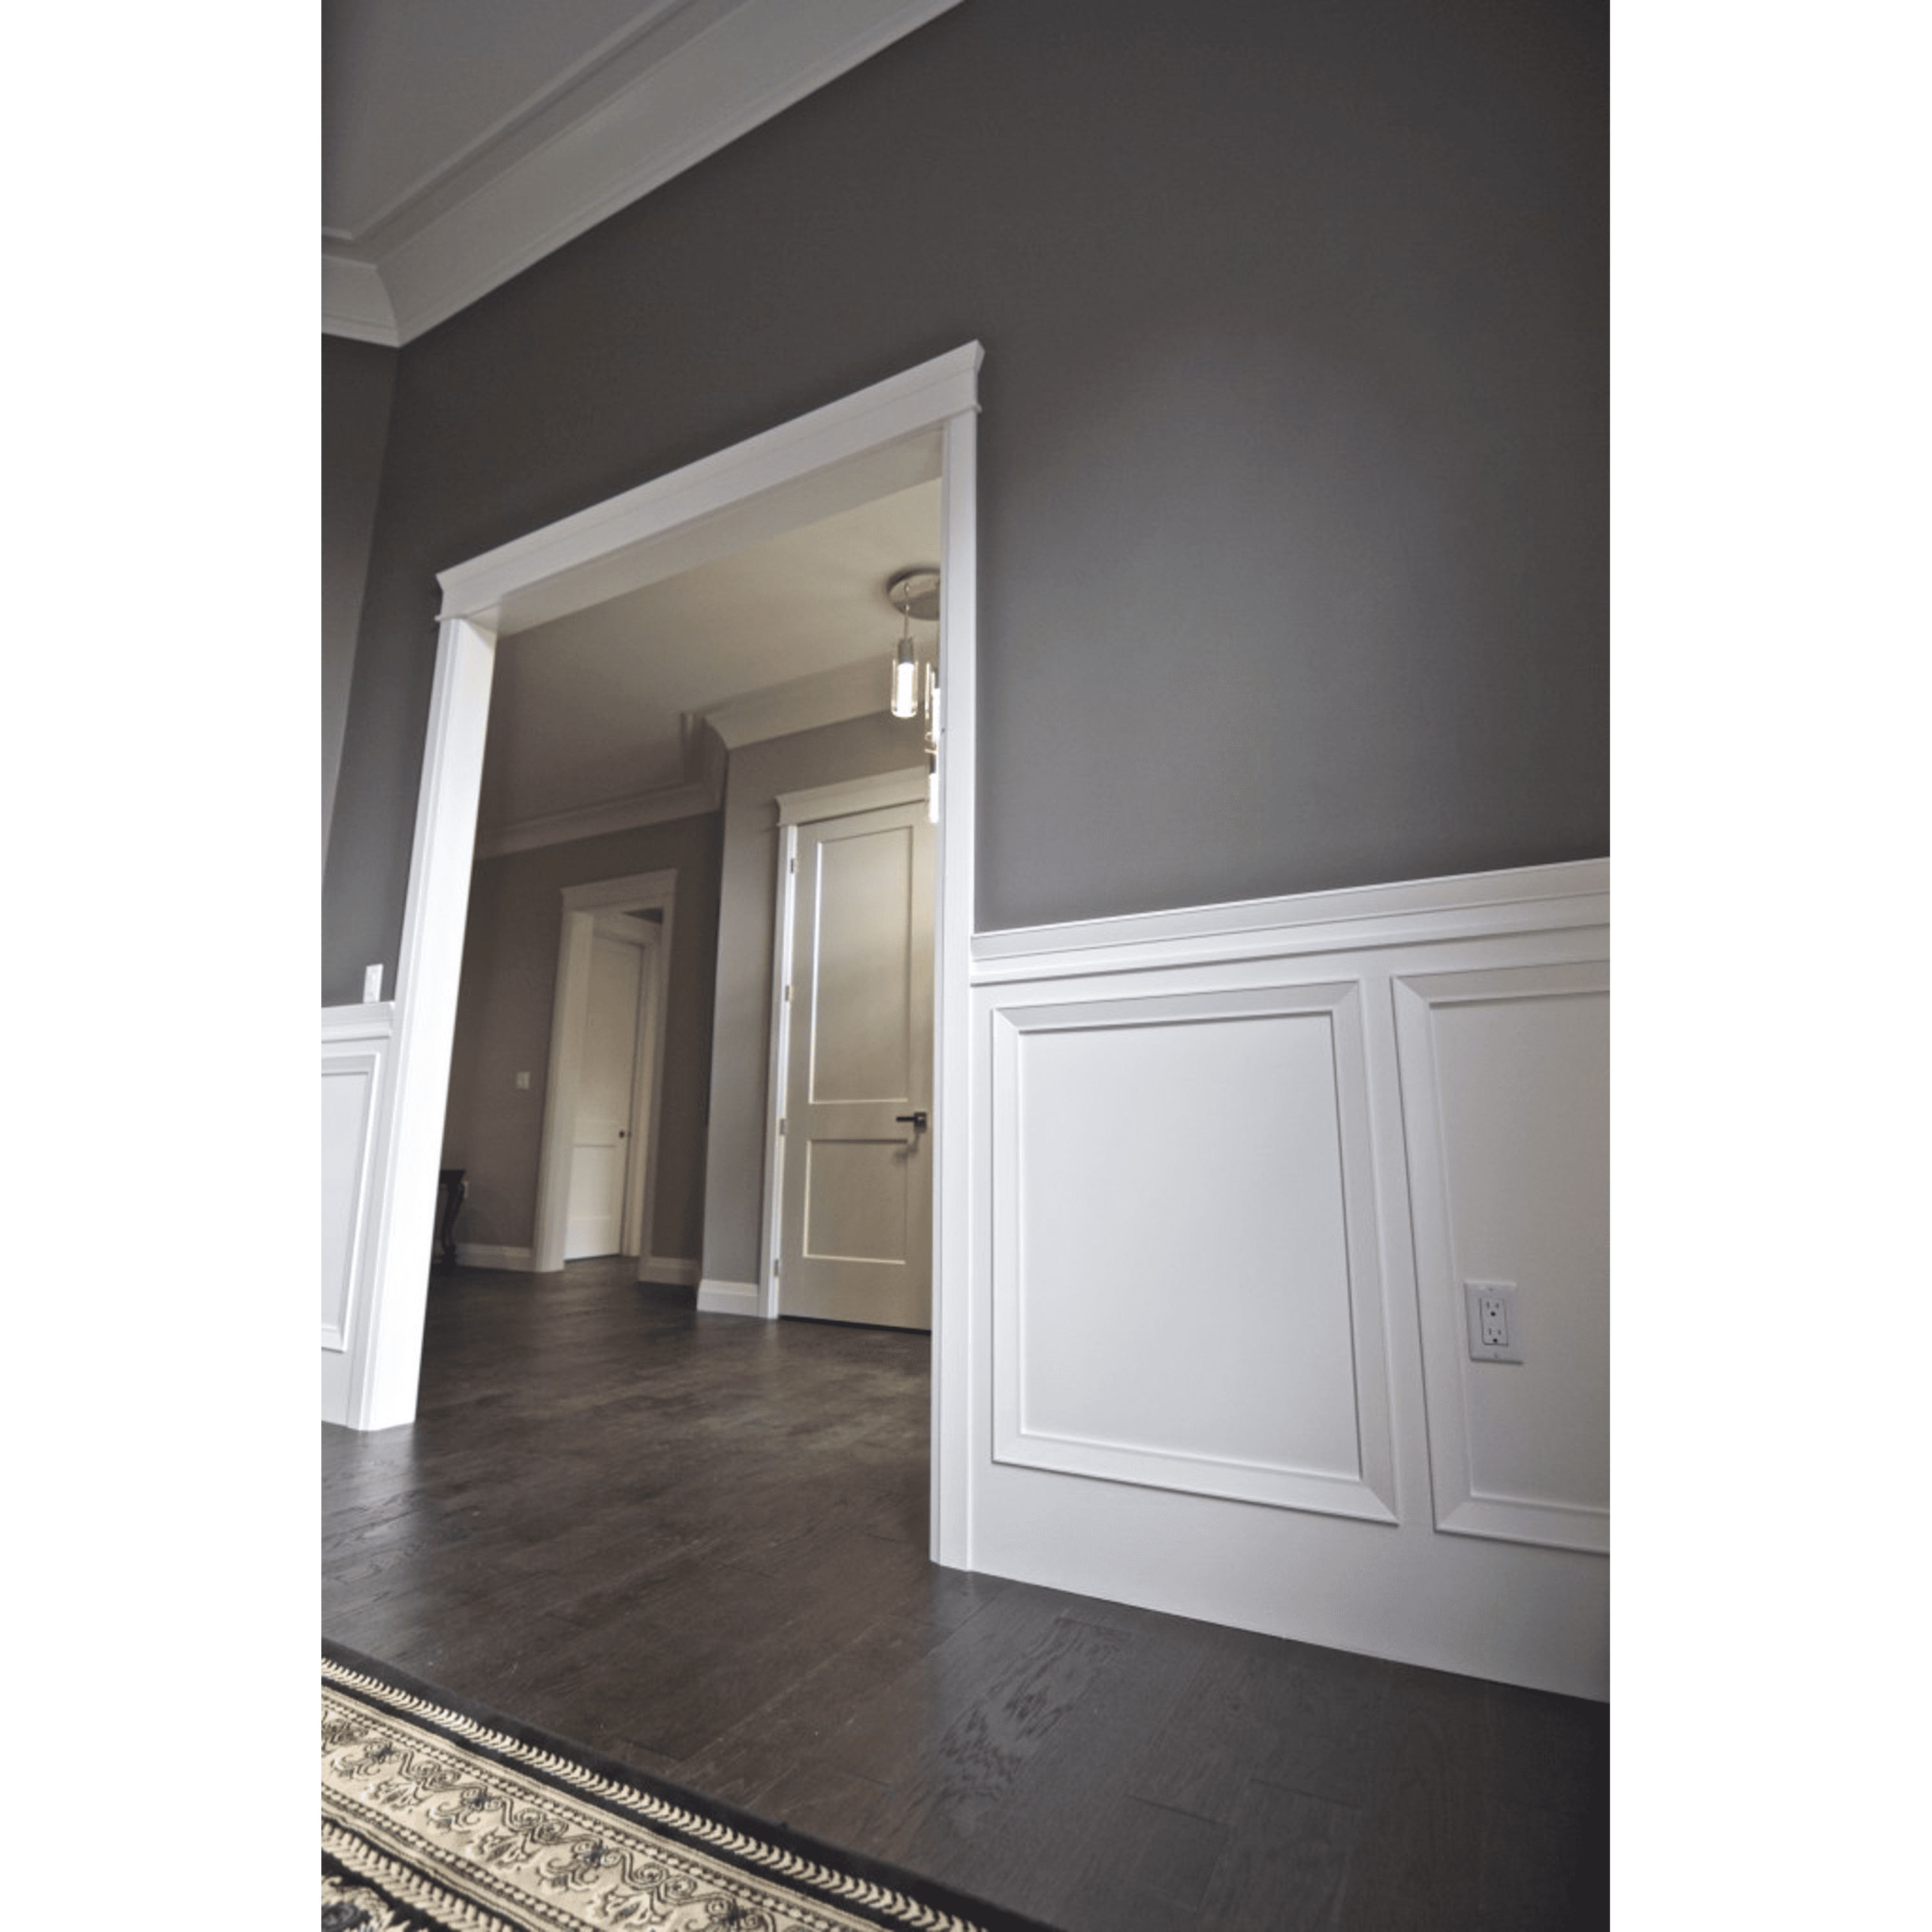 For Blog Only - Kerr's Home Products - Hallway Panel Wainscot